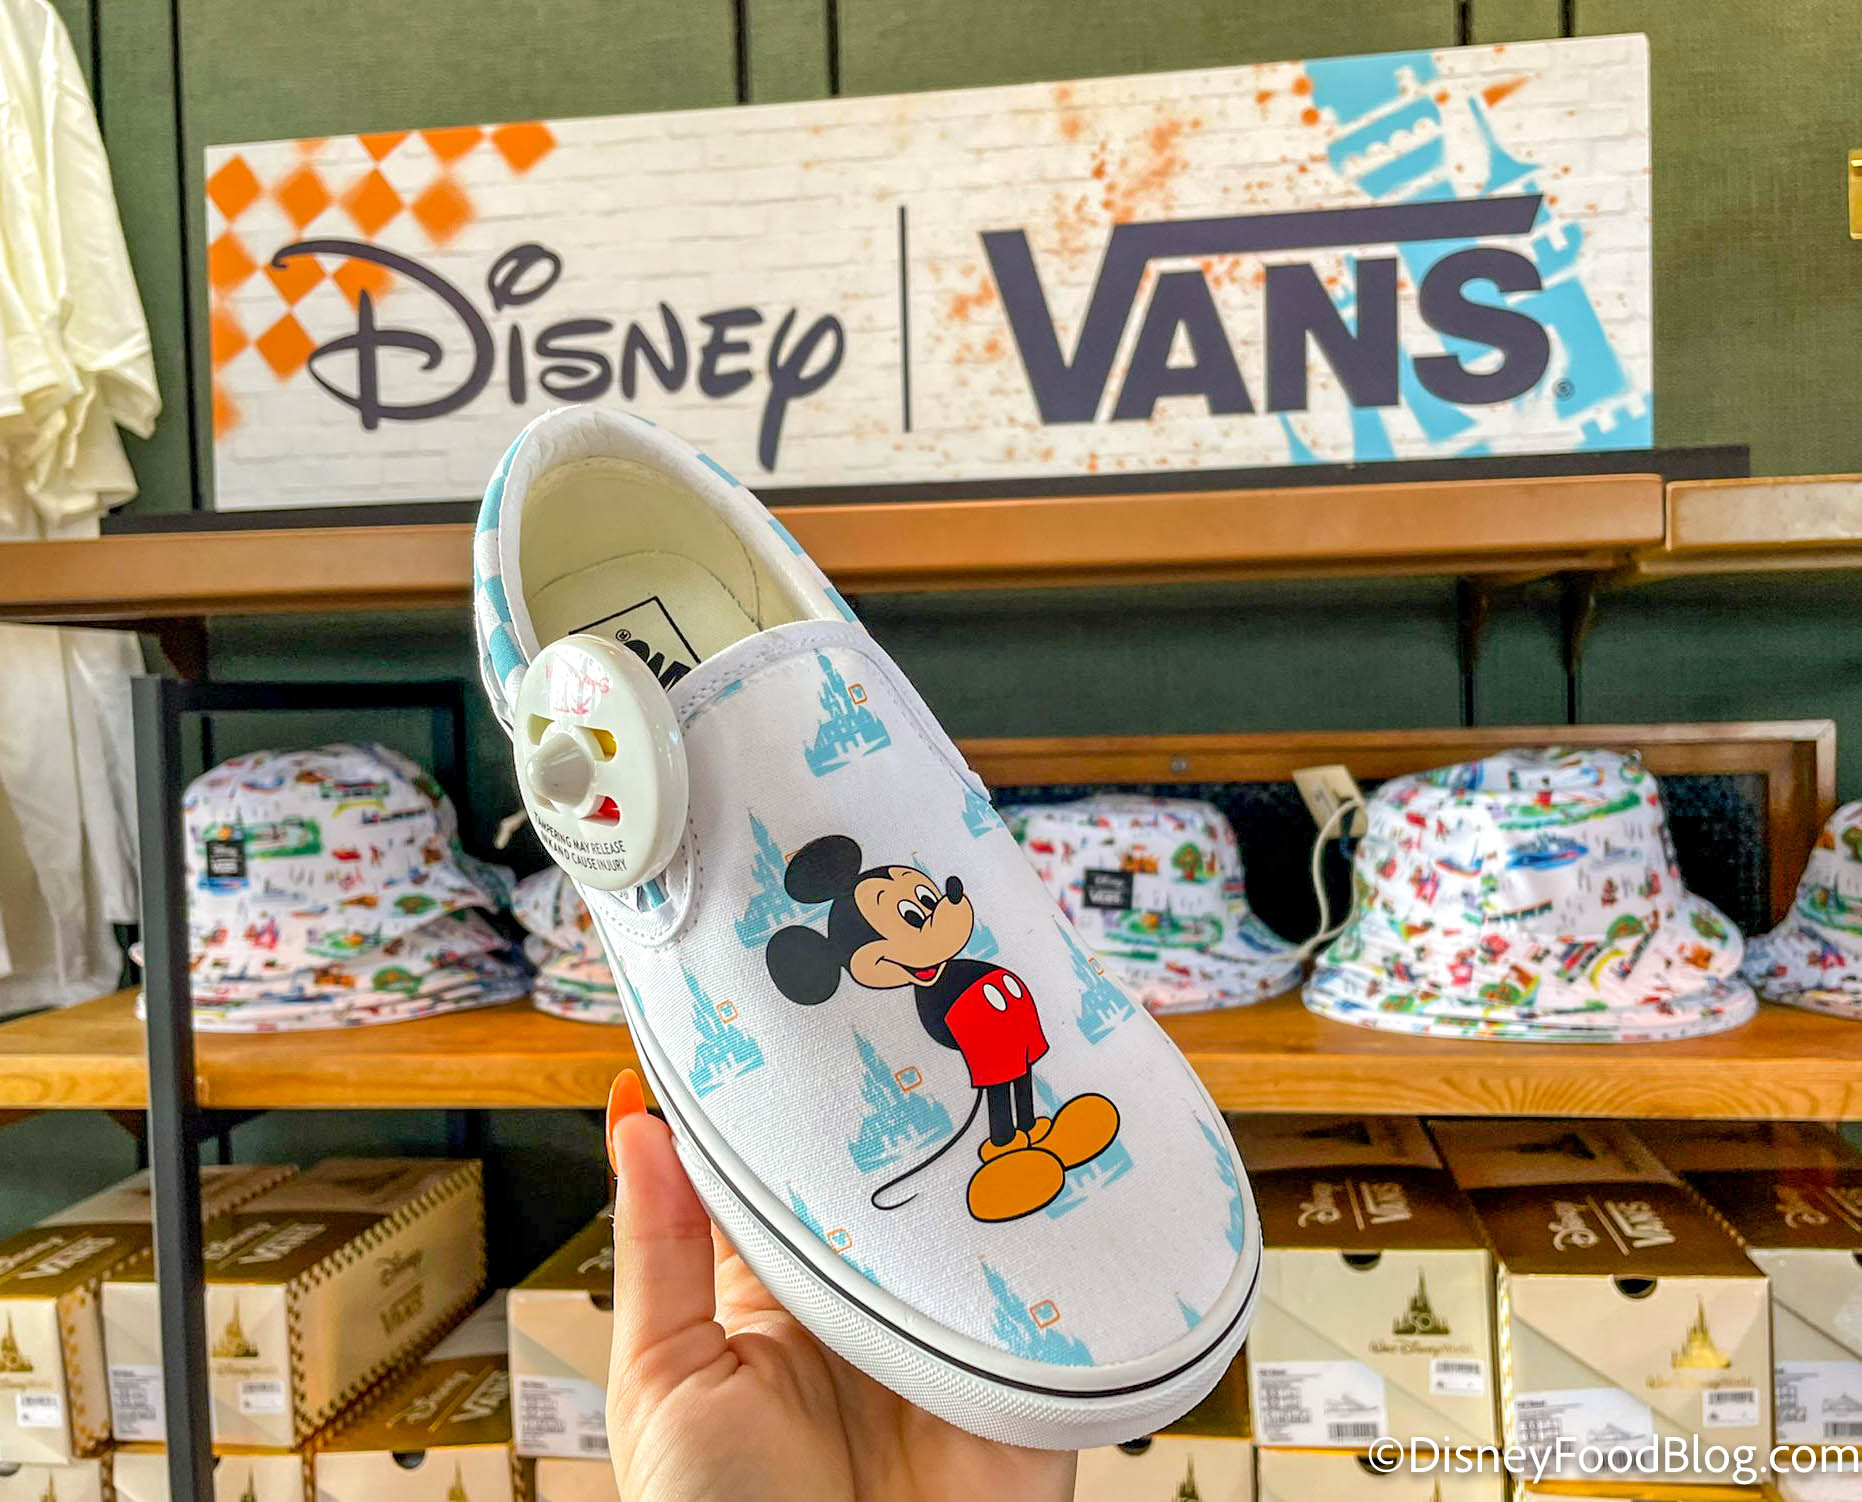 NEW 50th Vans Slip-on Shoes Are Now in the disney food blog